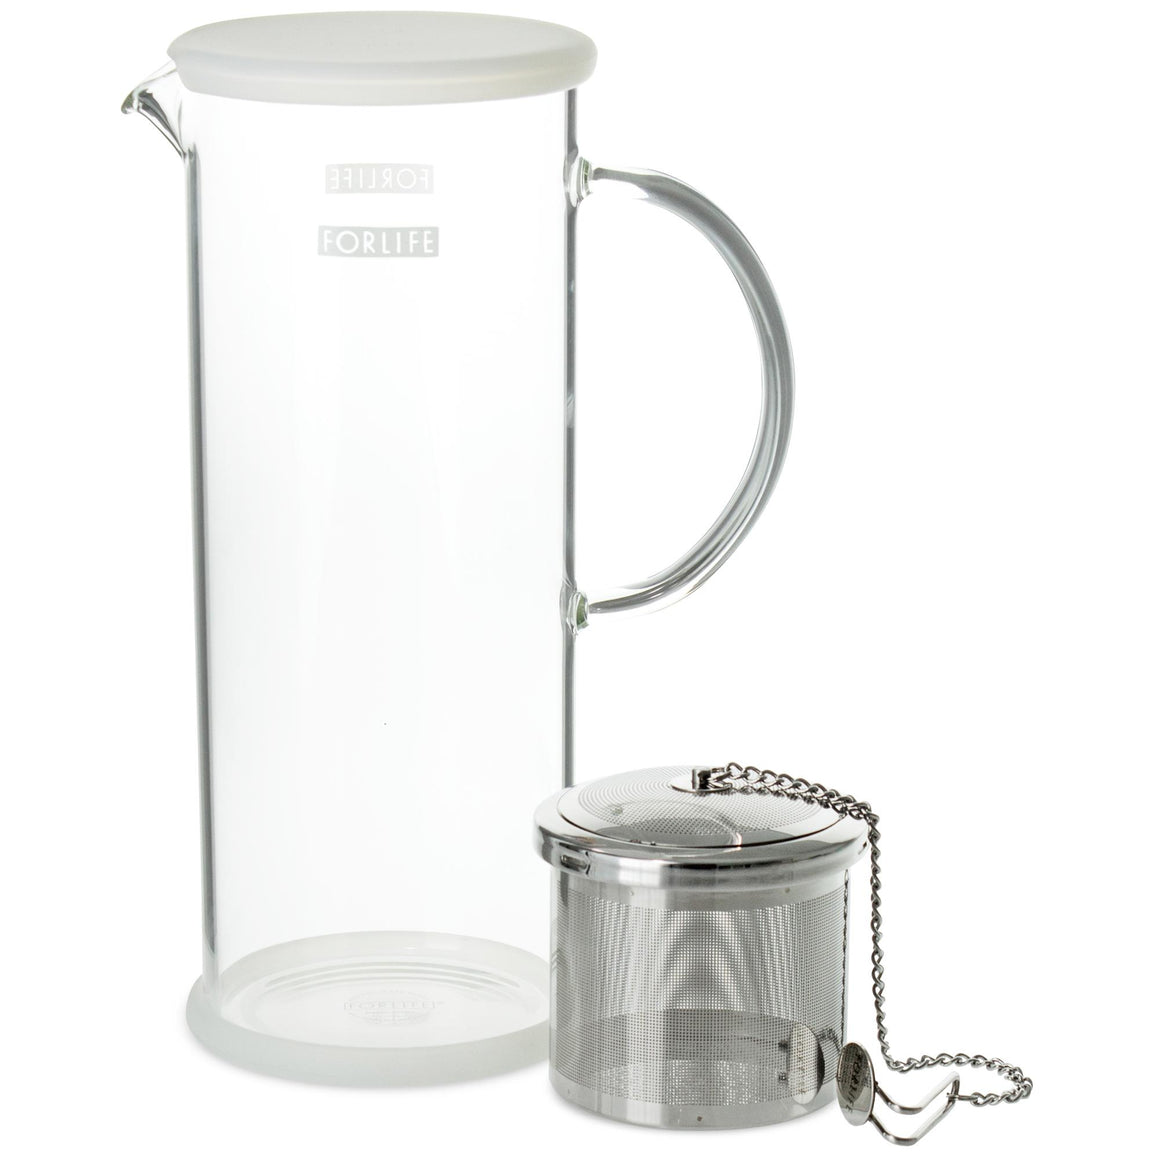 ForLife Lucent Iced Tea Pitcher